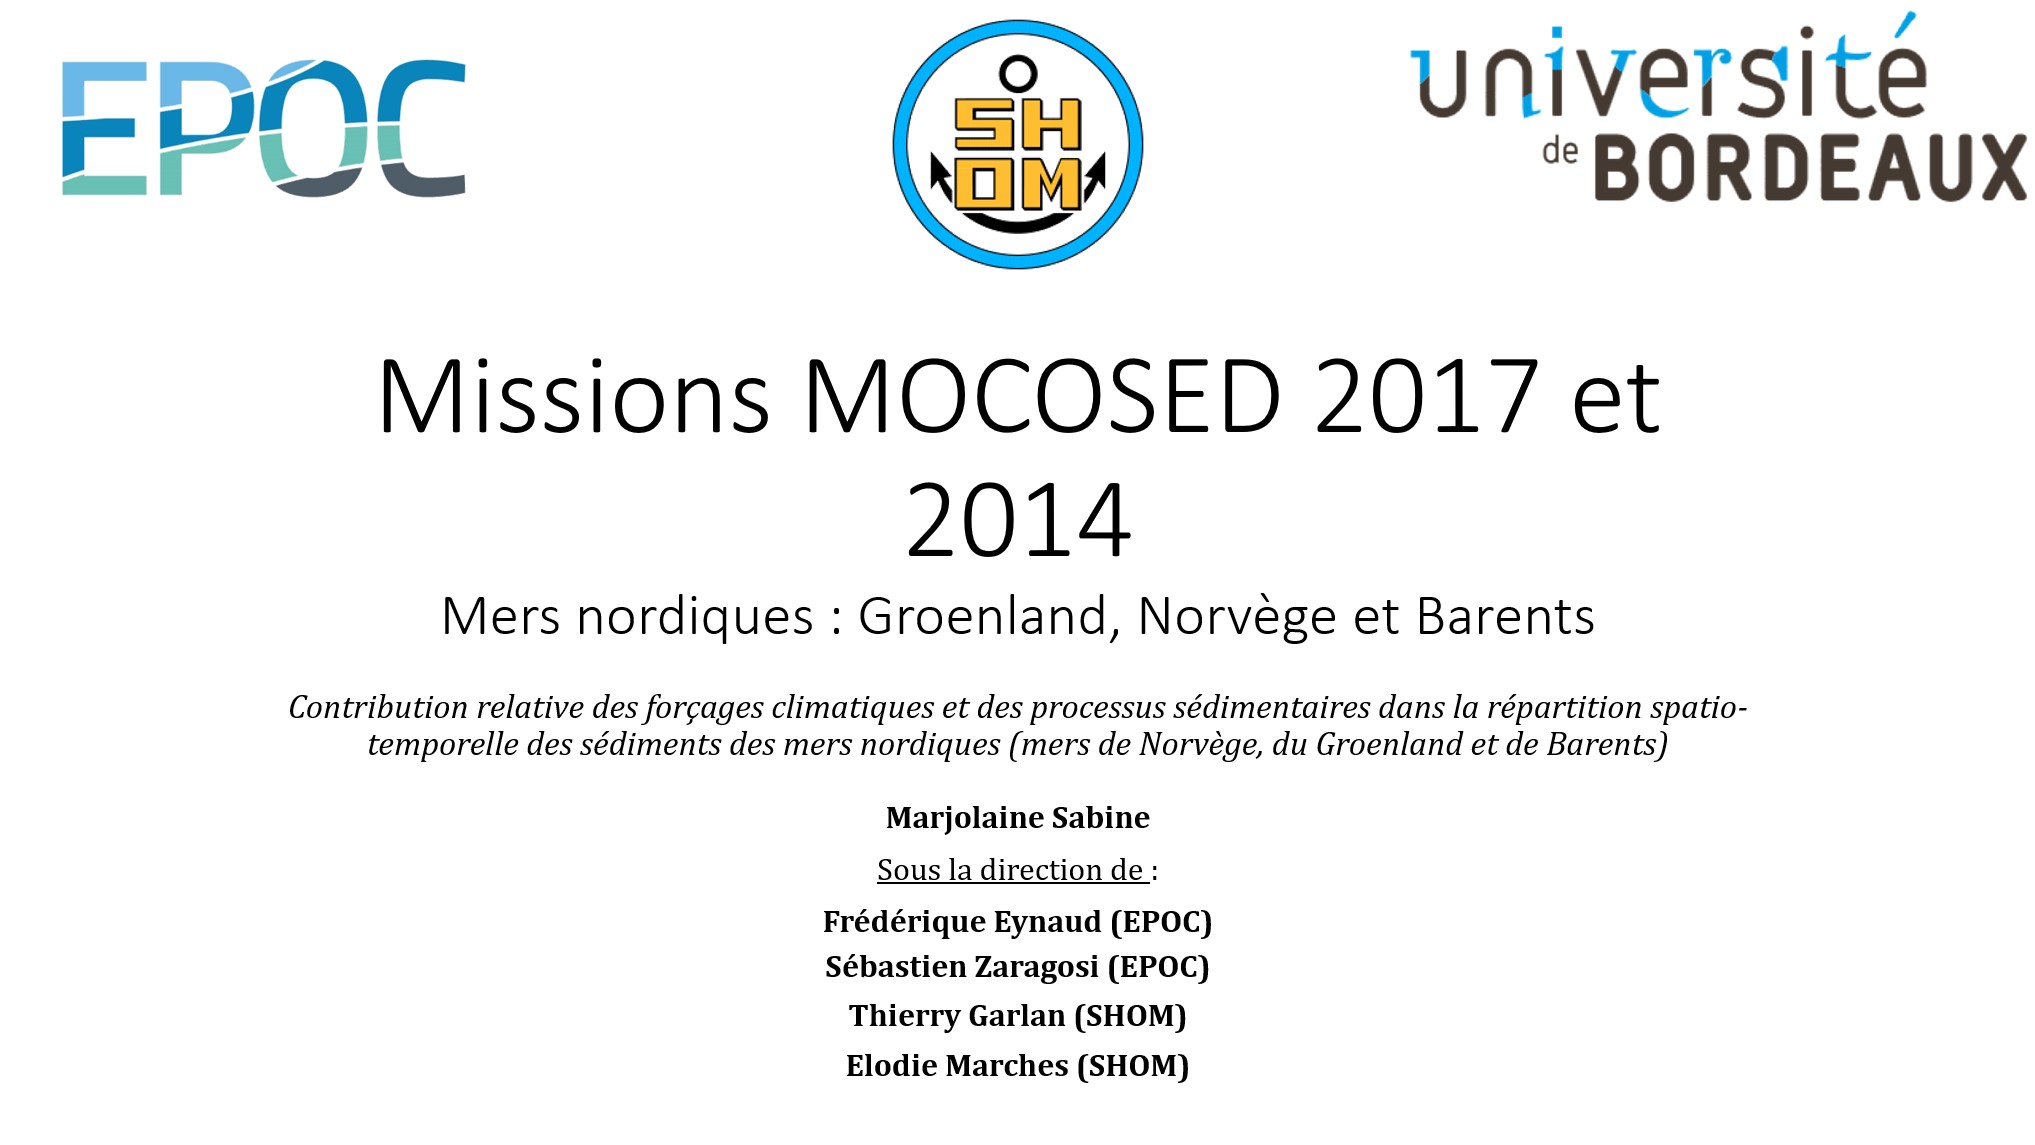 Missions MOCOSED 2017 et MOCOSED 2014